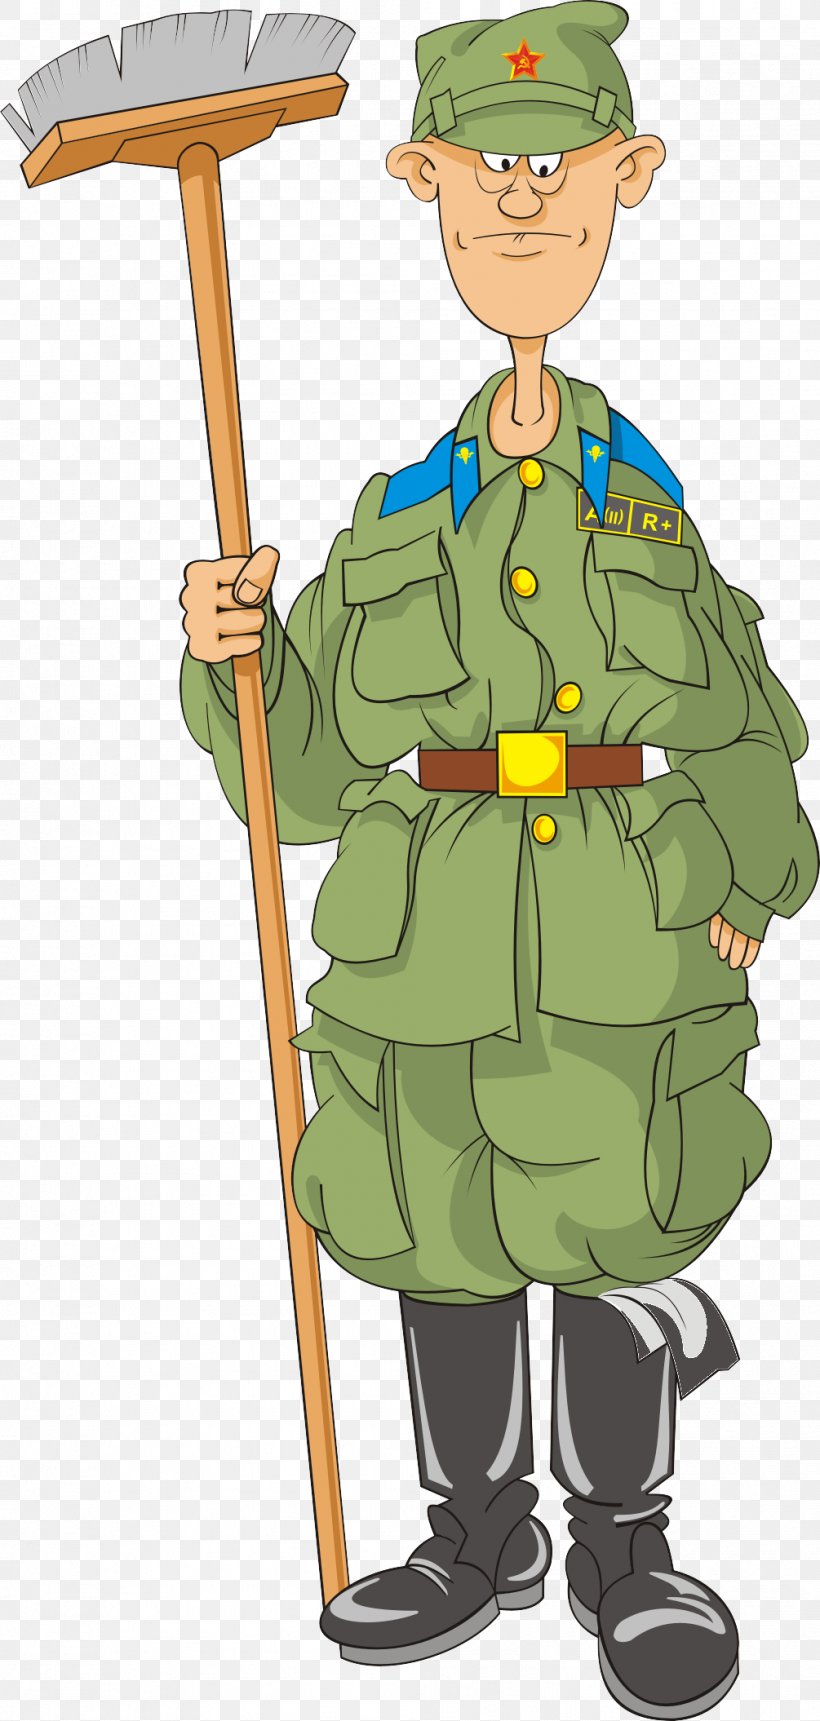 Soldier Defender Of The Fatherland Day Animation Clip Art, PNG, 1005x2110px, 23 February, Soldier, Animation, Apng, Cartoon Download Free